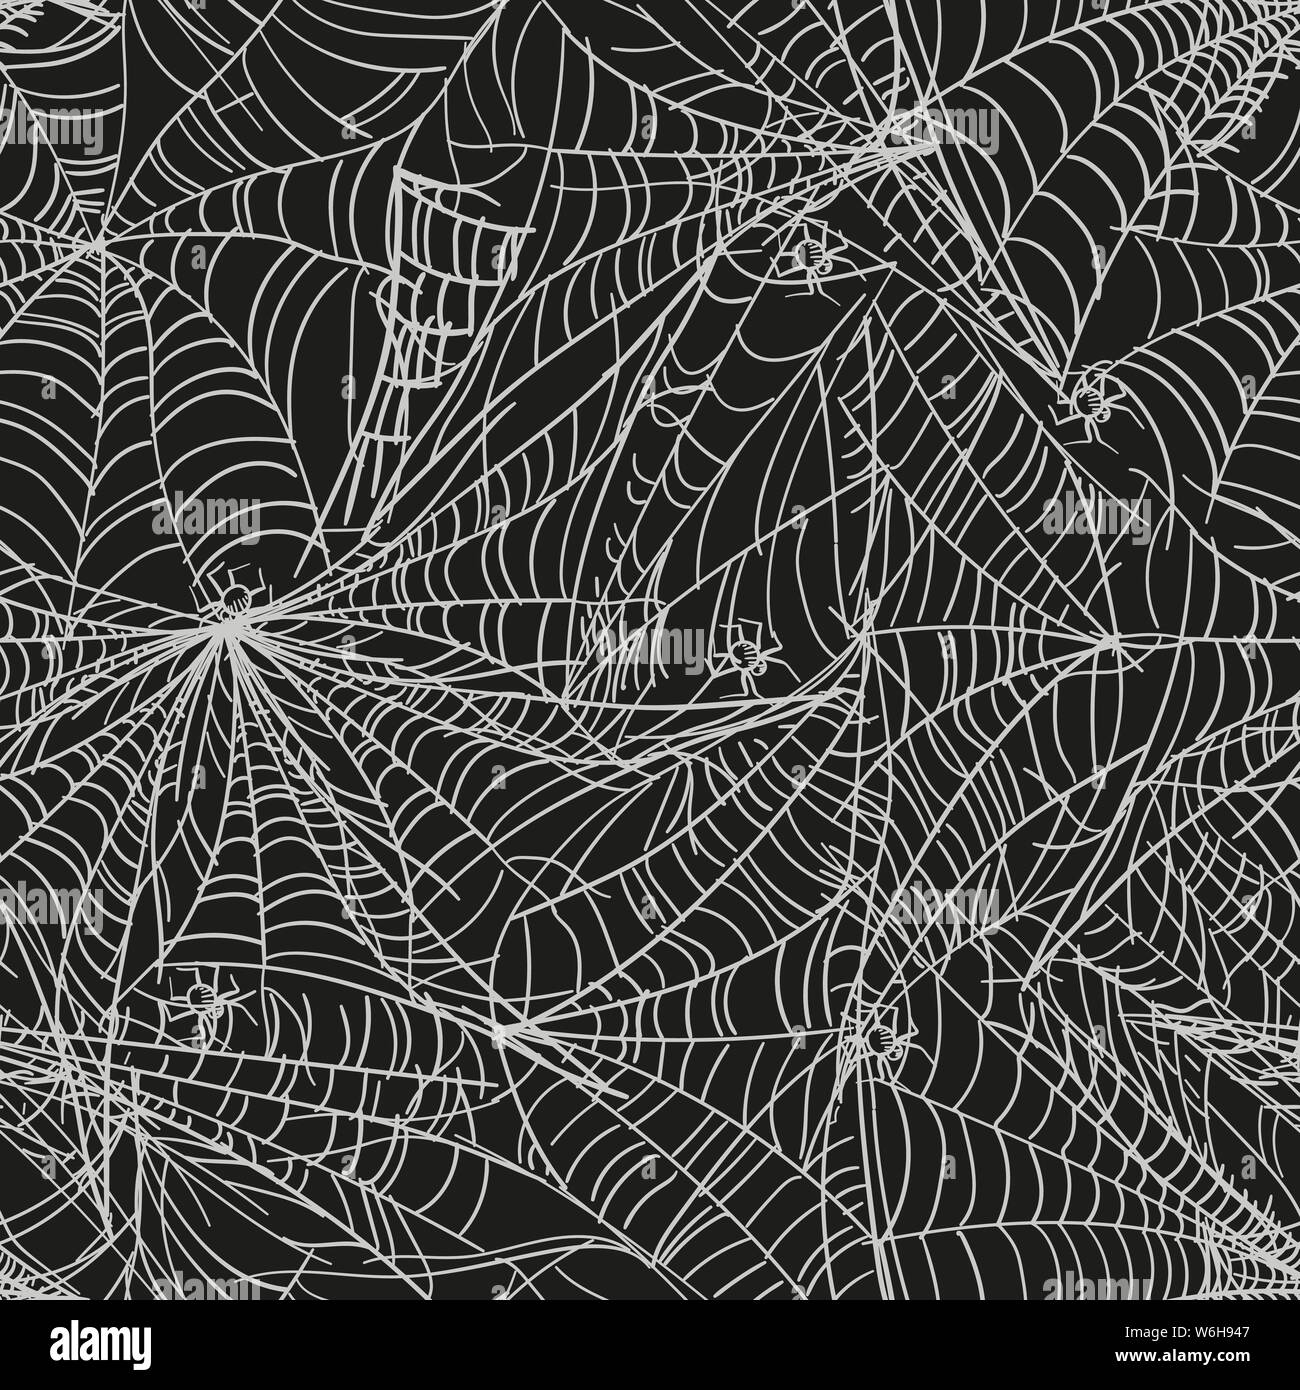 Black spider web seamless pattern with white spiders. Vector seamless background. Stock Vector